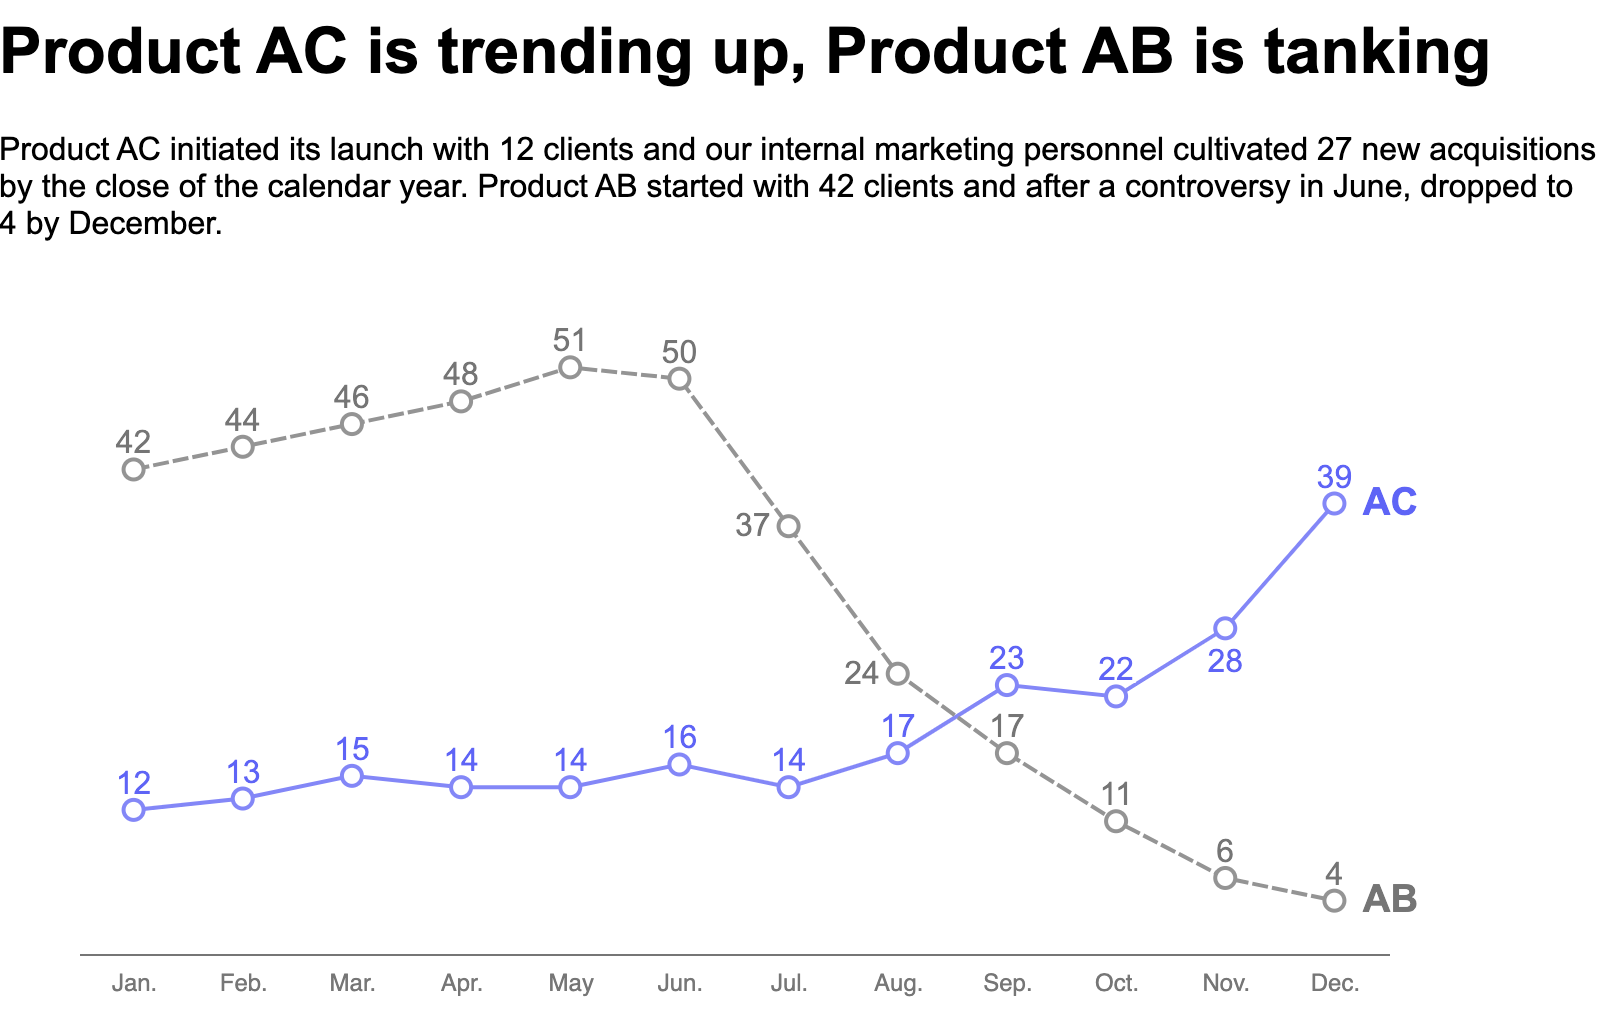 Product AC is trending up, Product AB is tanking. Line chart with two lines, starting in Jan. and ending in Dec. Long description: Product AC initiated its launch with 12 clients and our internal marketing personnel cultivated 27 new acquisitions by the close of the calendar year. Product AB started with 42 clients and after a controversy in June, dropped to 4 by December.